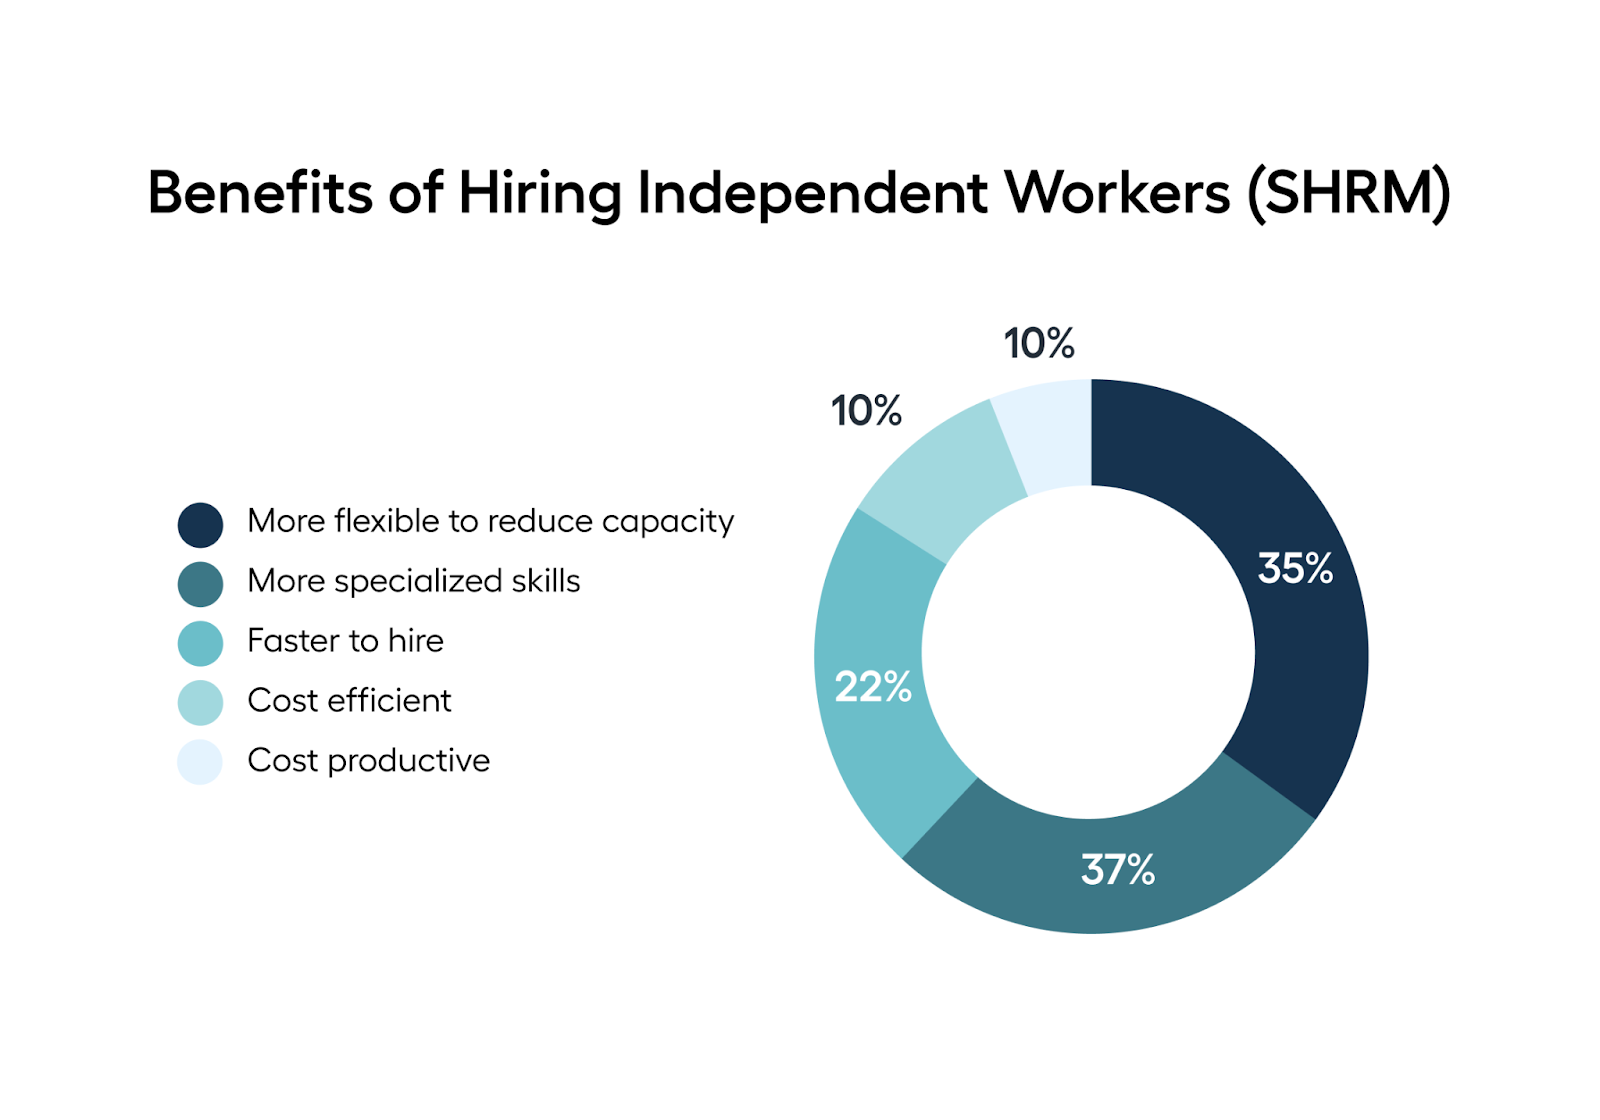 a pie chart showing the top five benefits of hiring freelancers, with flexibility at the top.